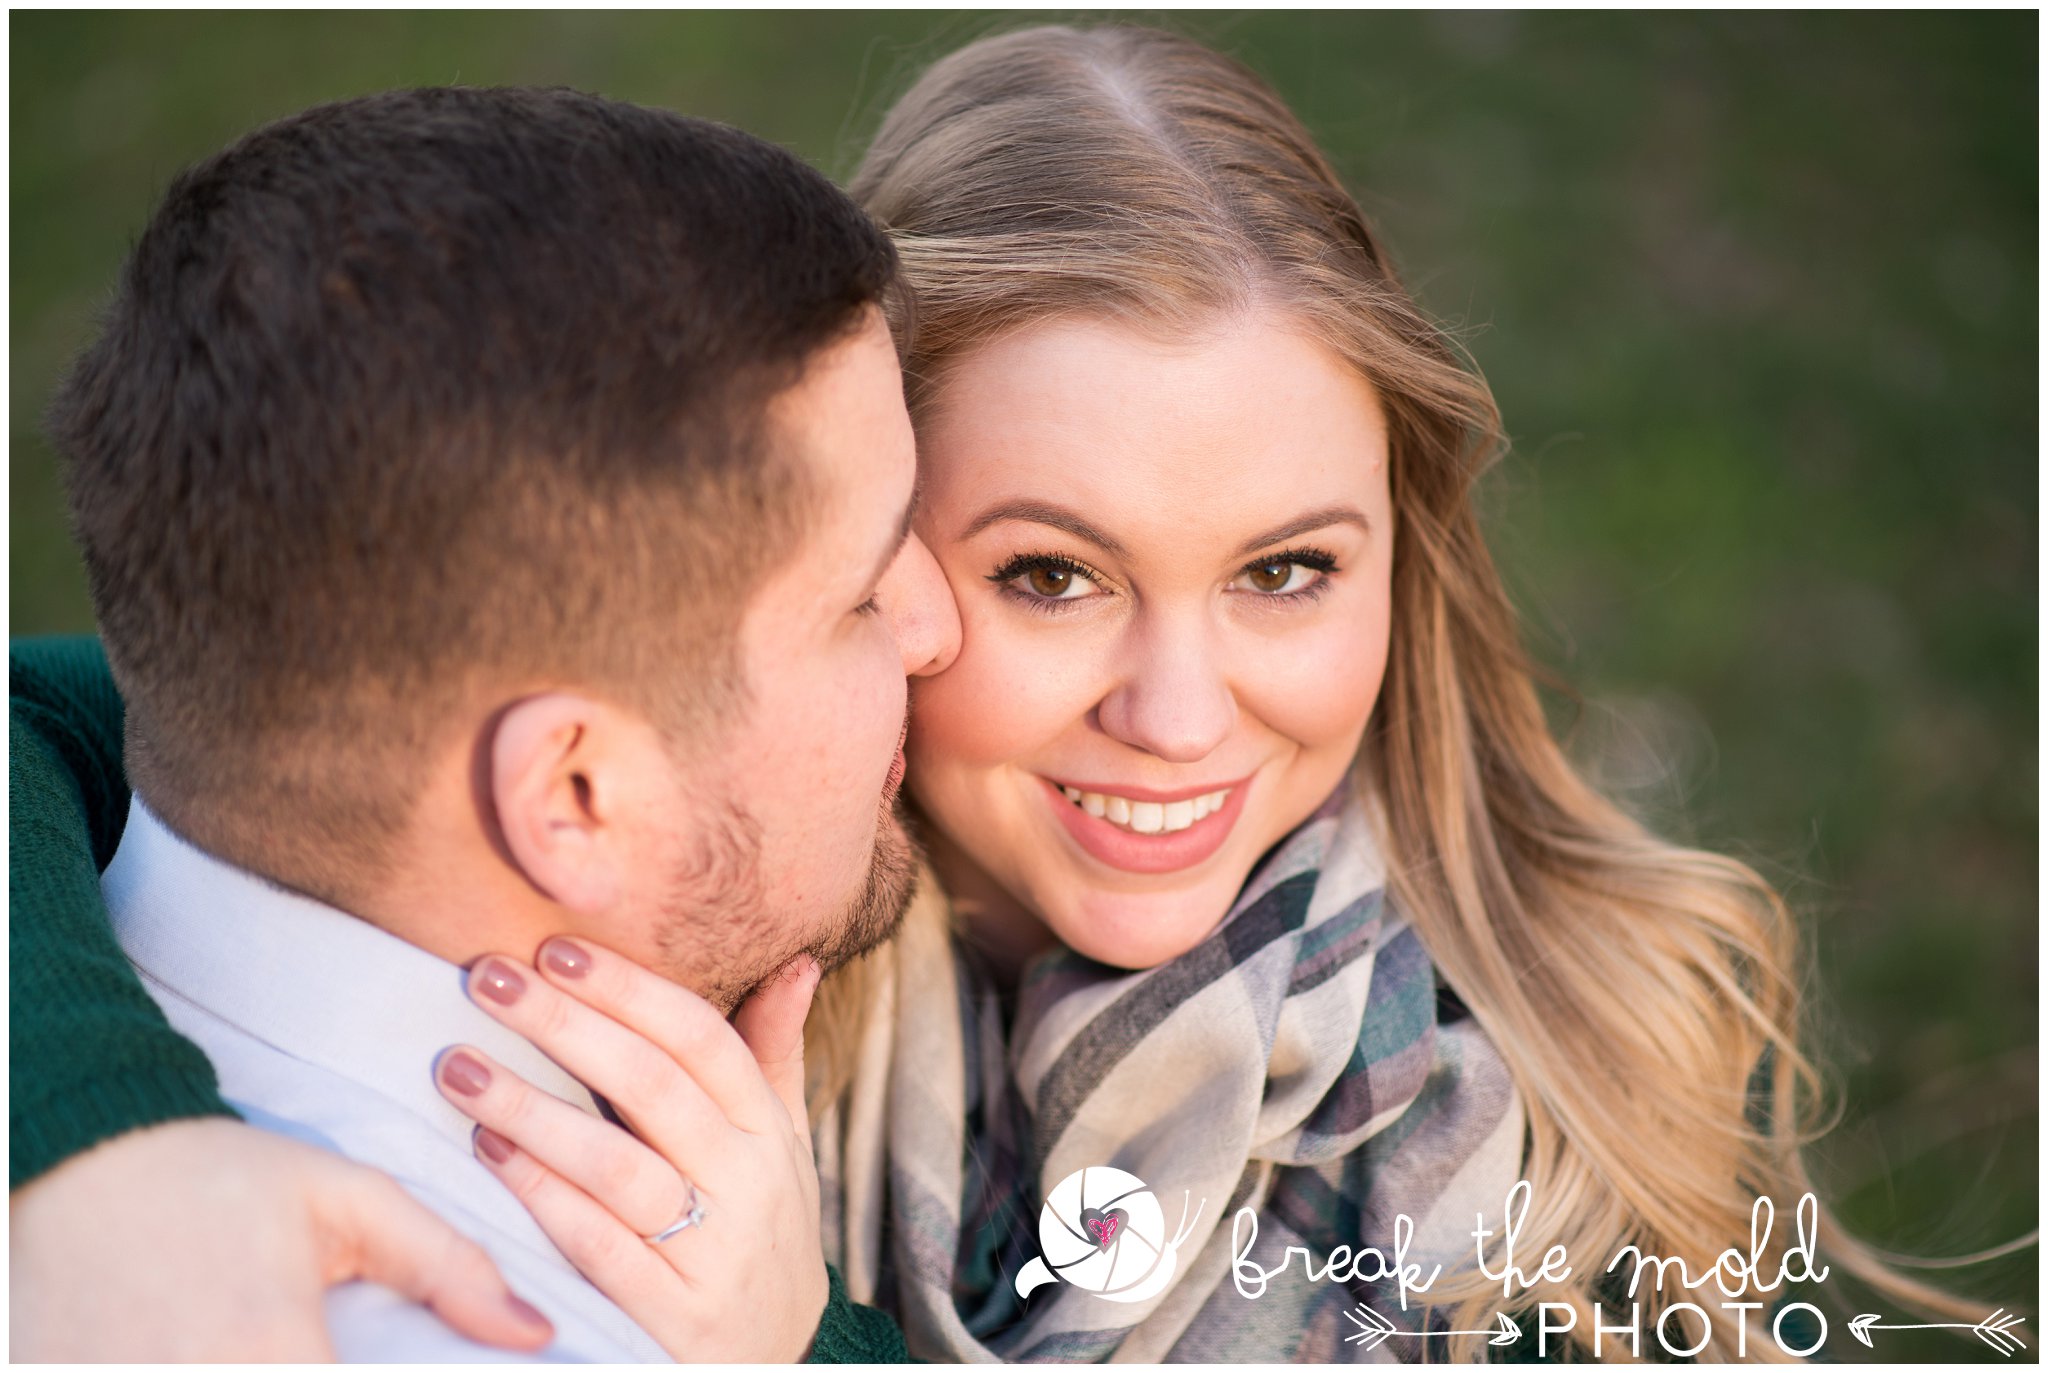 break-the-mold-photo-engagement-session-downtown-knoxville-try-before-you-buy_9869.jpg